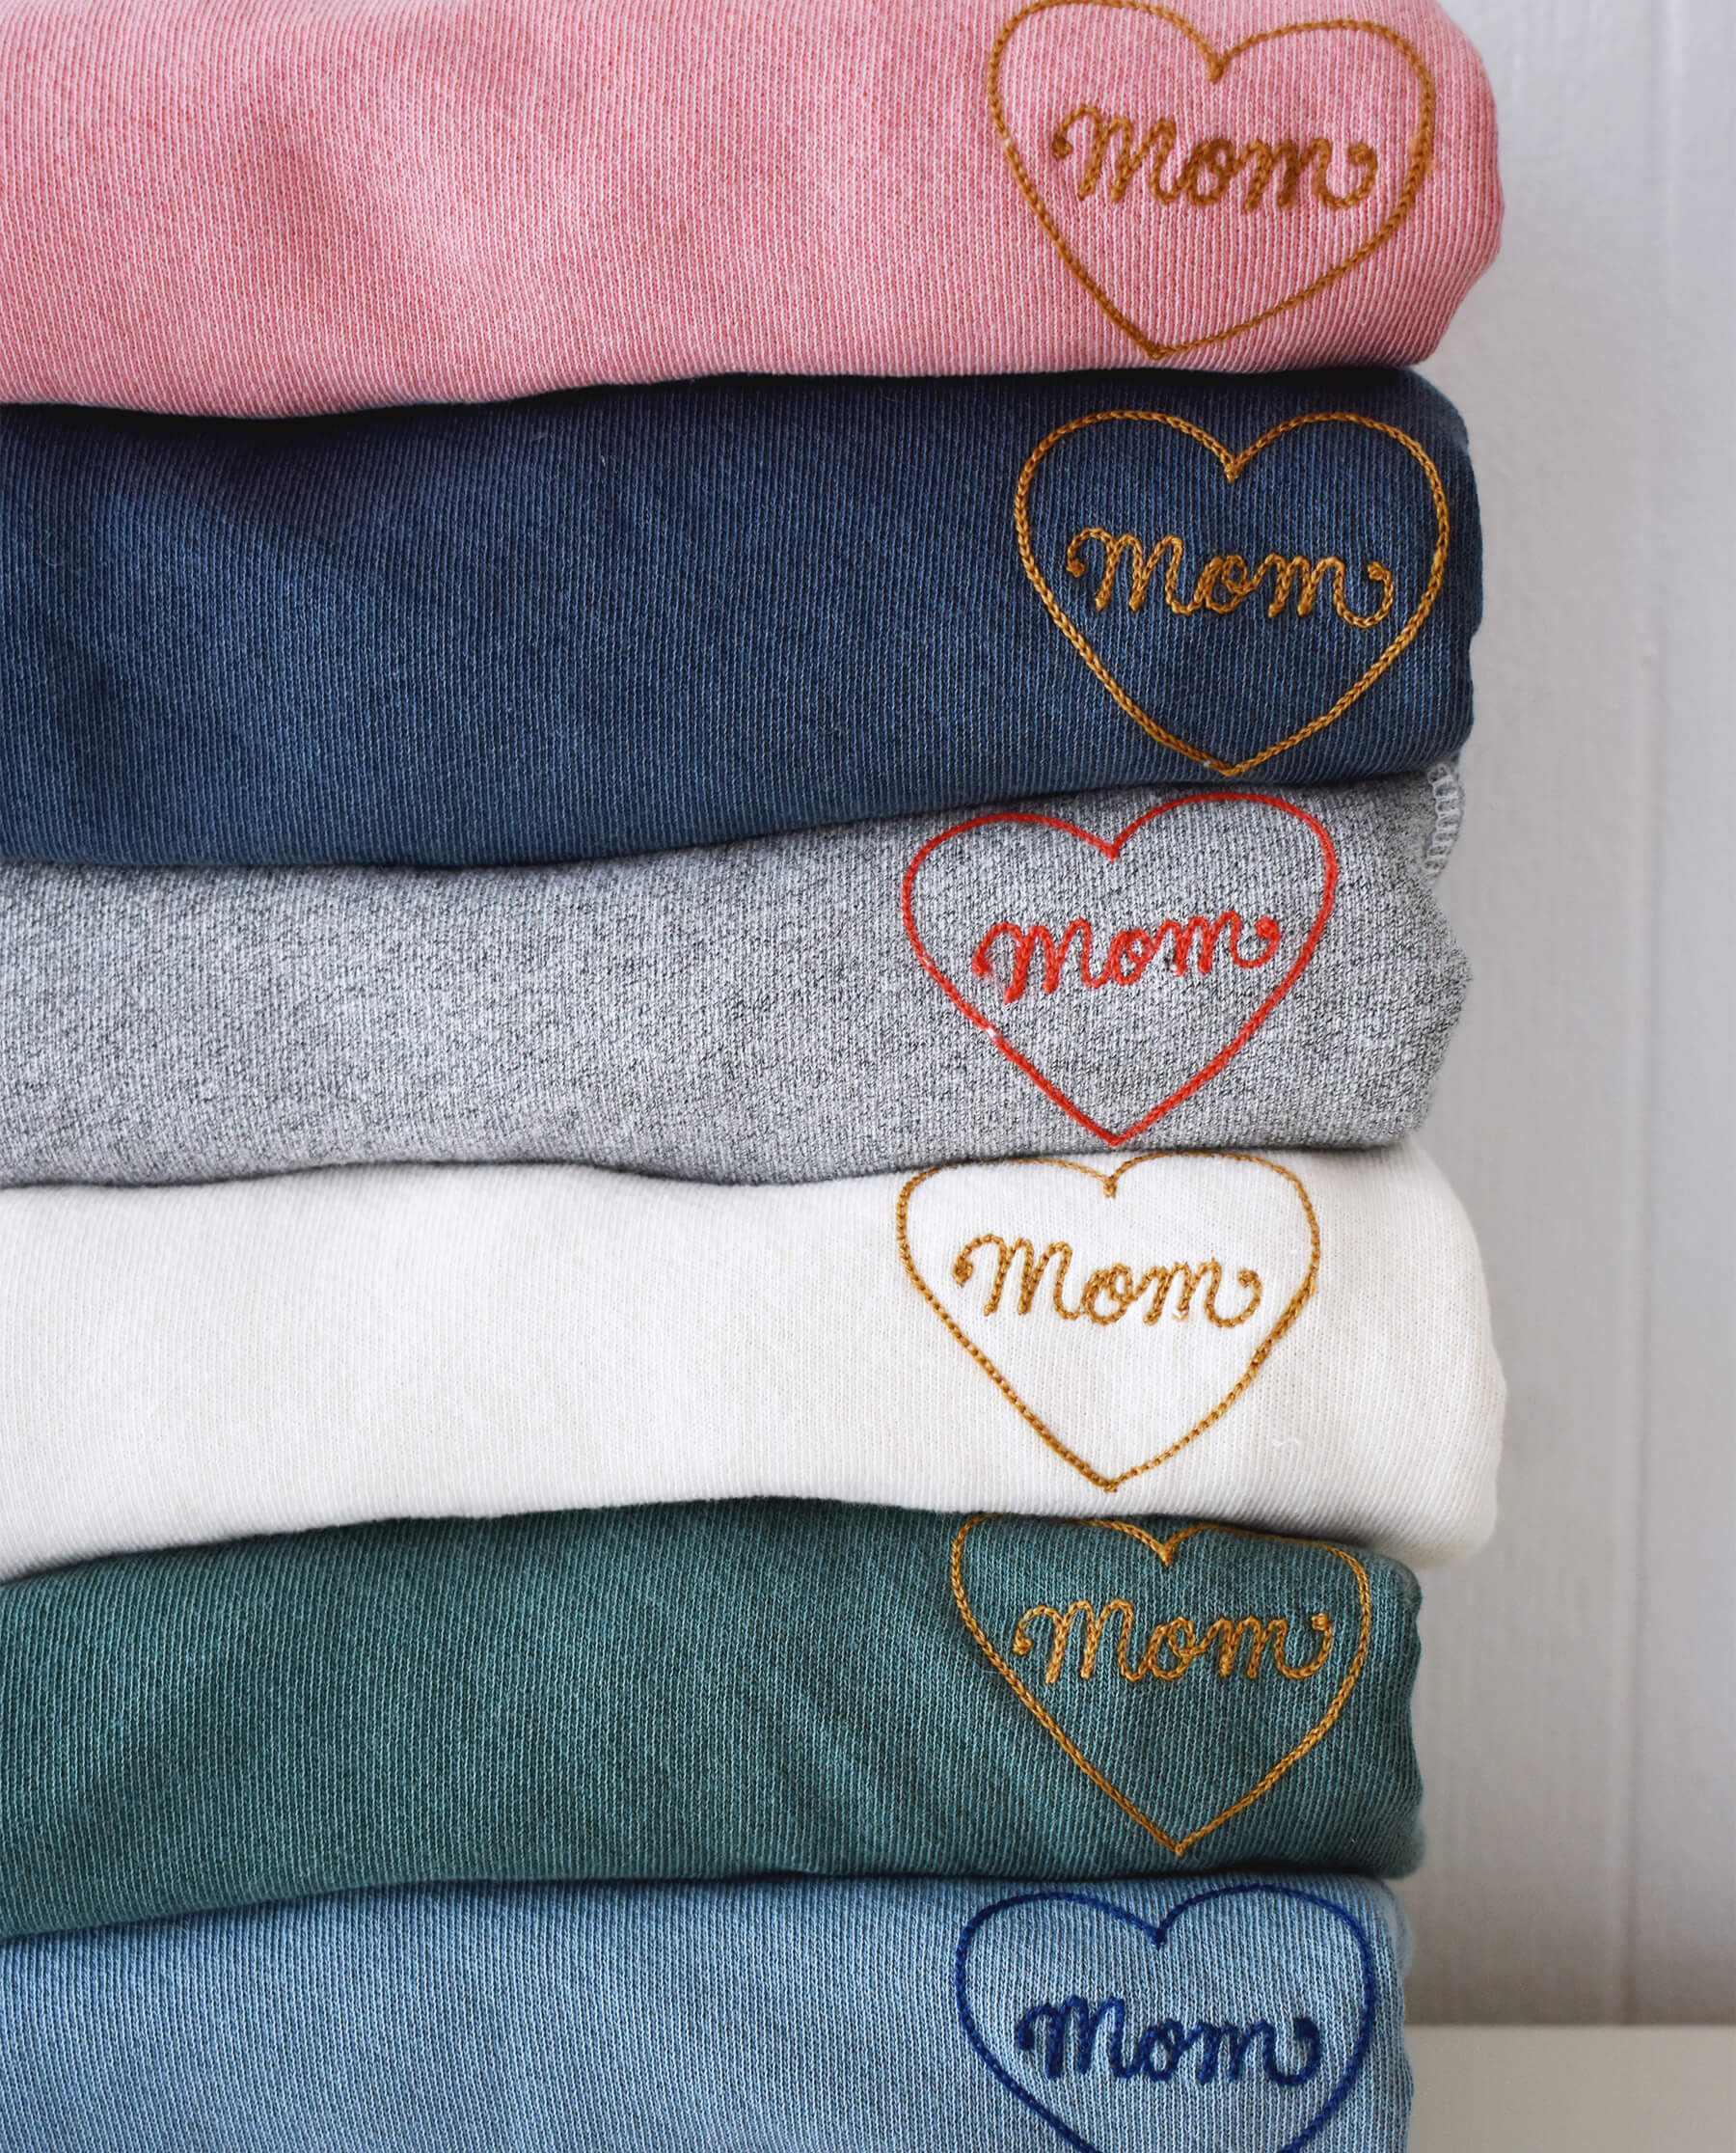 The Mom Embroidered College Sweatshirt. -- Gaucho Blue with Navy SWEATSHIRTS THE GREAT. SP23 MOM